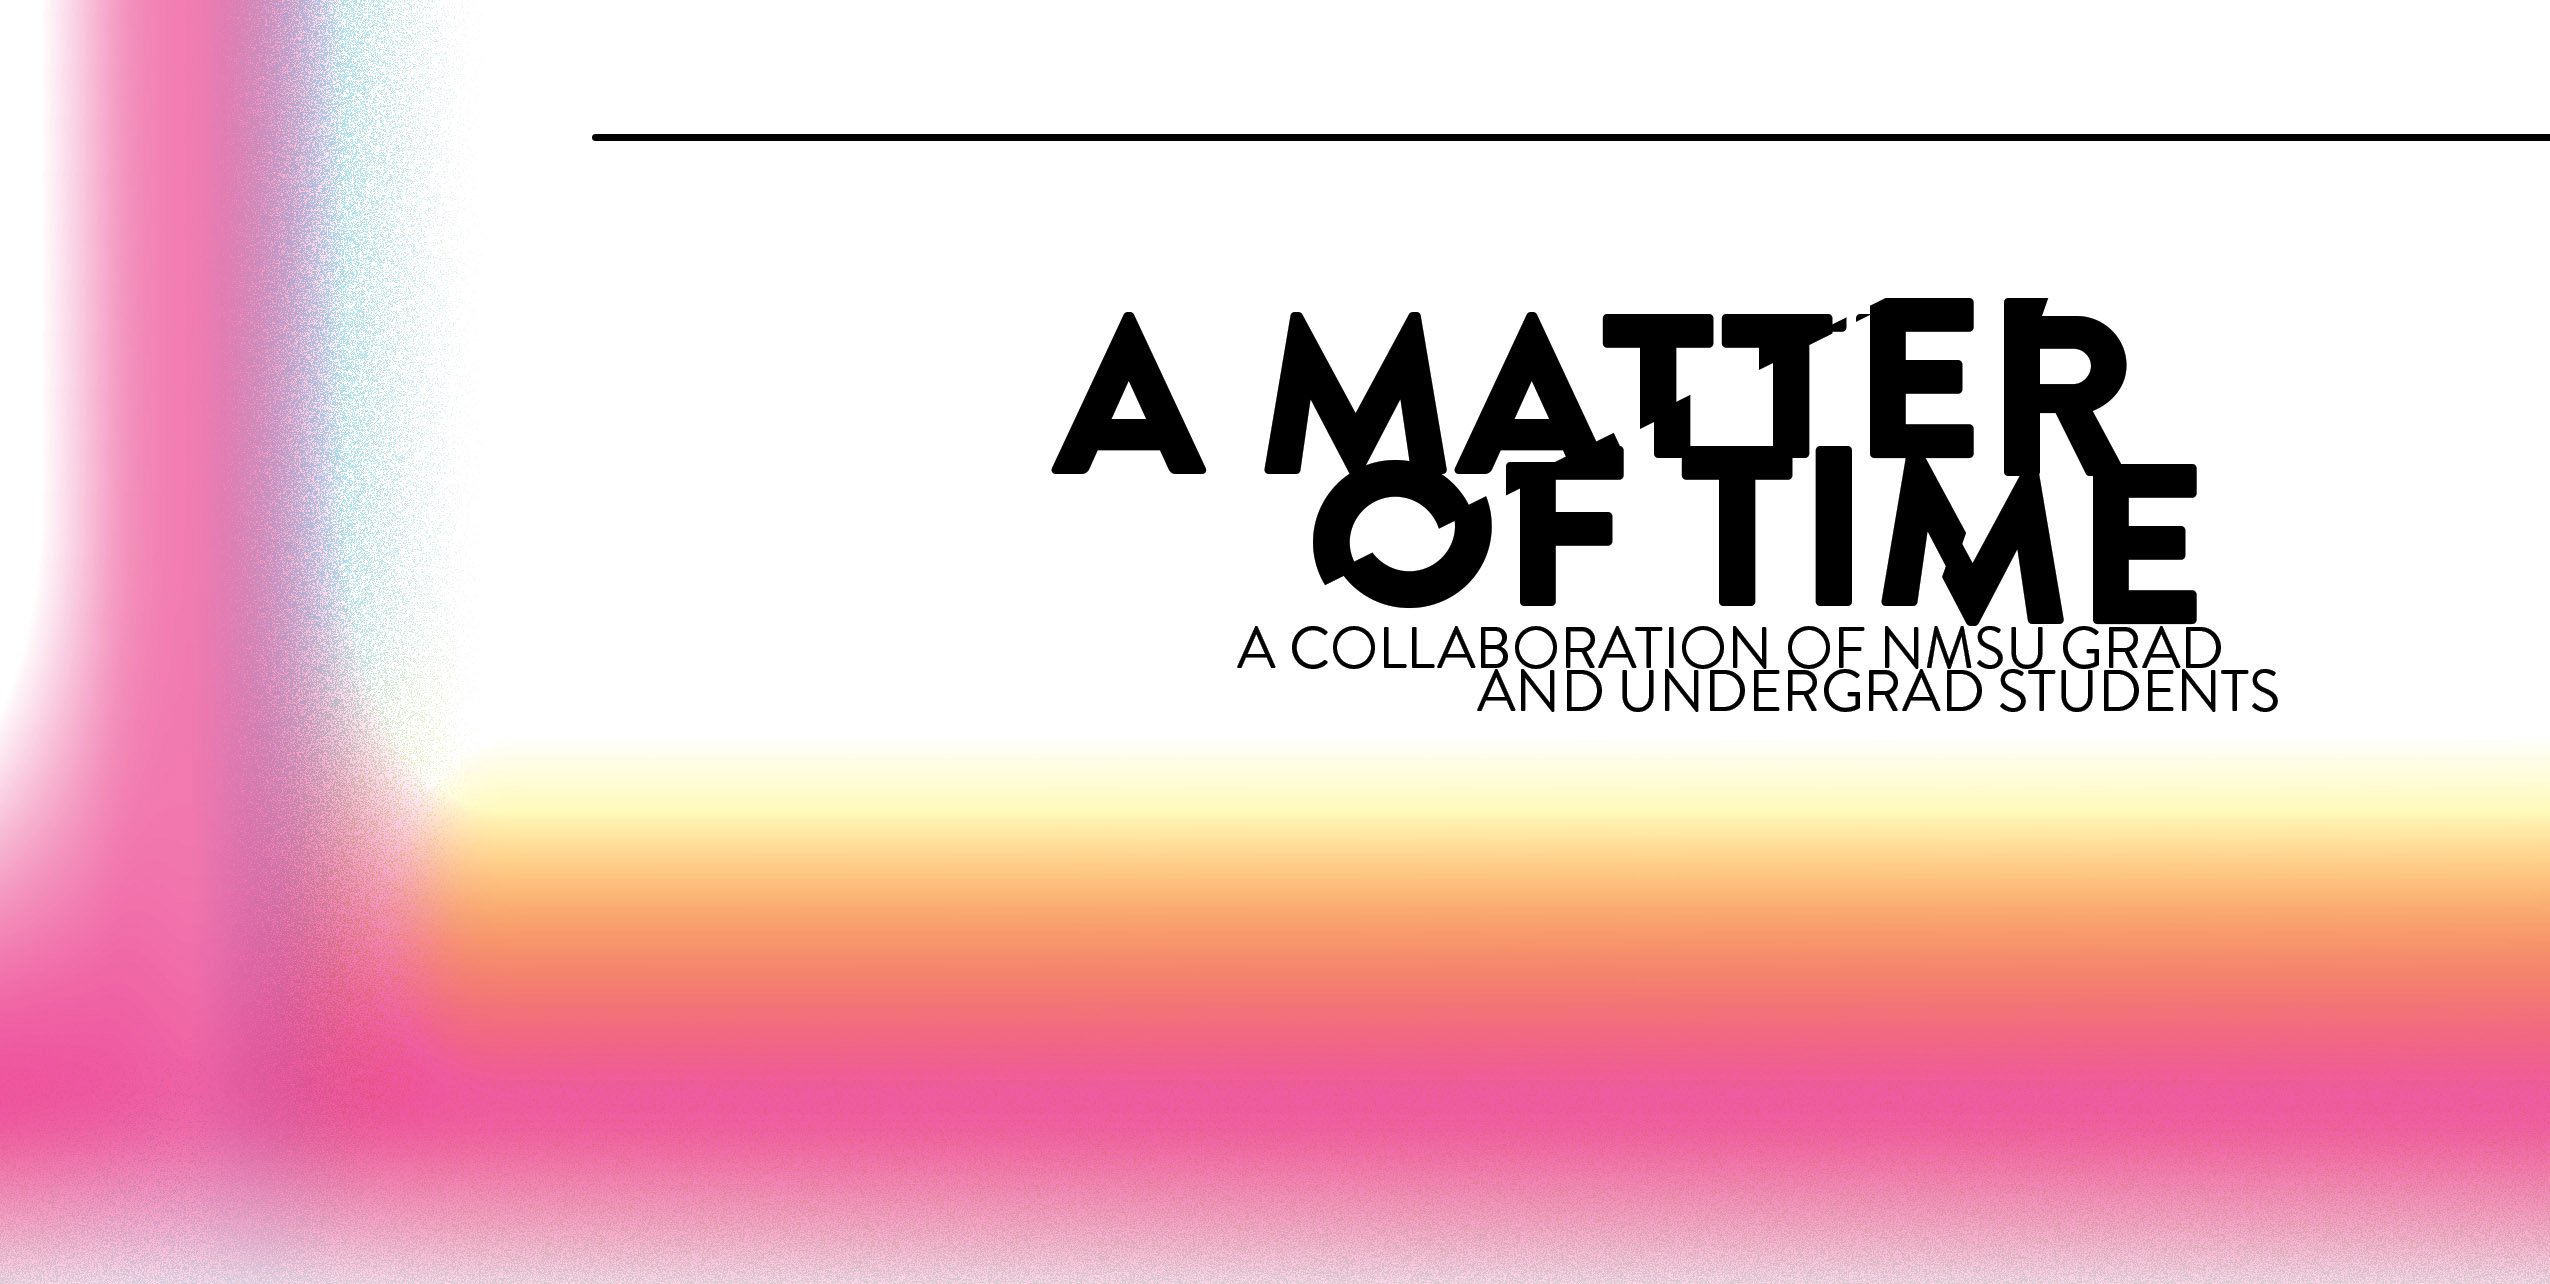 A Matter of Time Exhibition